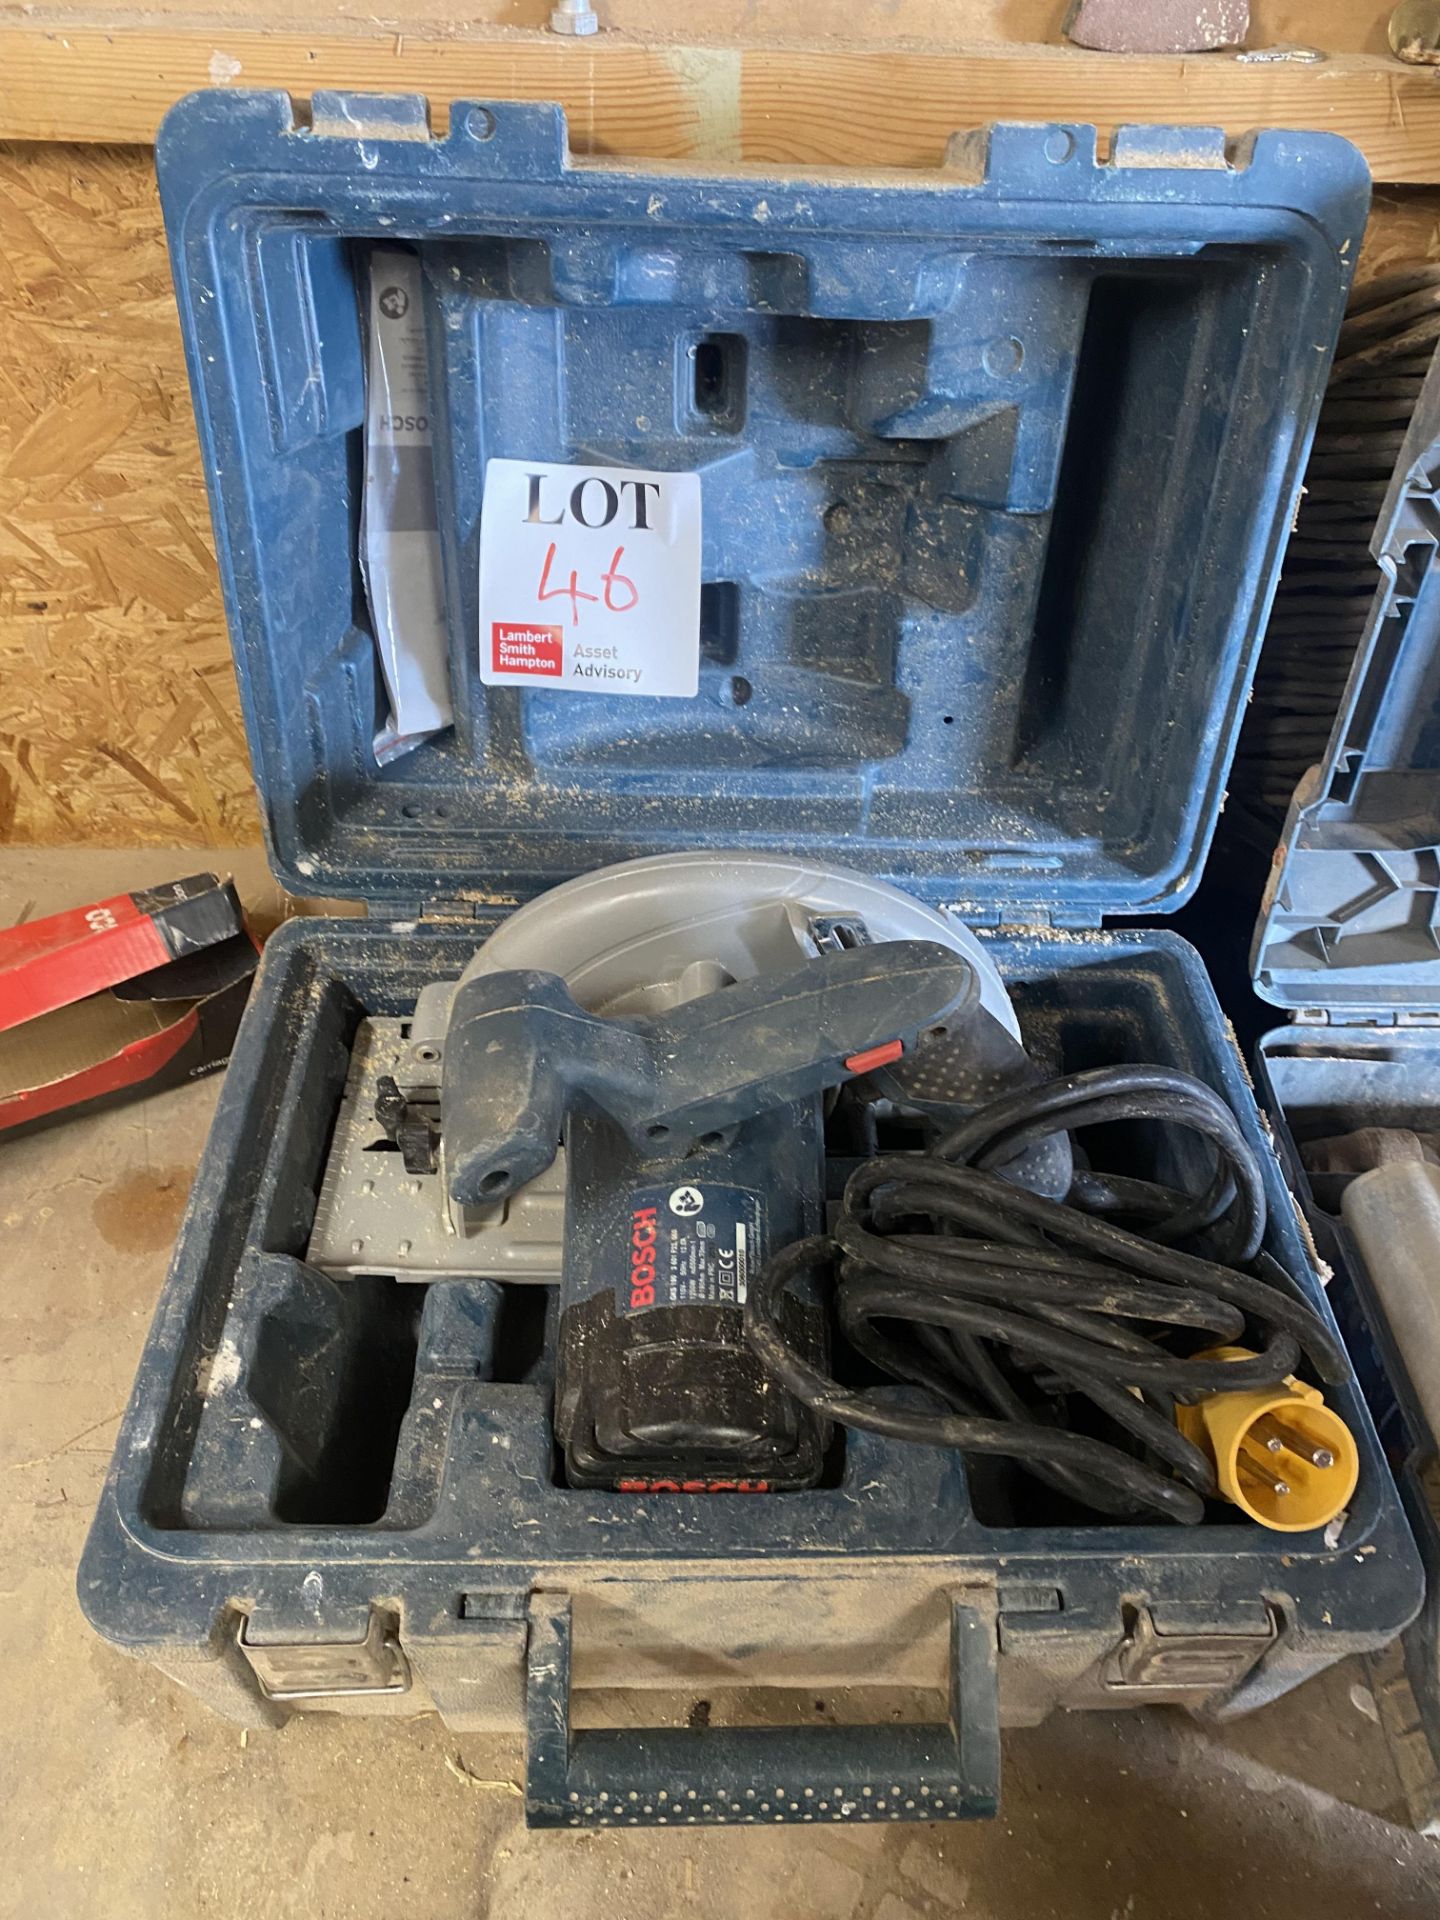 Bosch GKS 190 circular saw, 110v Located at Unit 54, Newcourt Barton, Clyst Road, Topsham, Exeter,